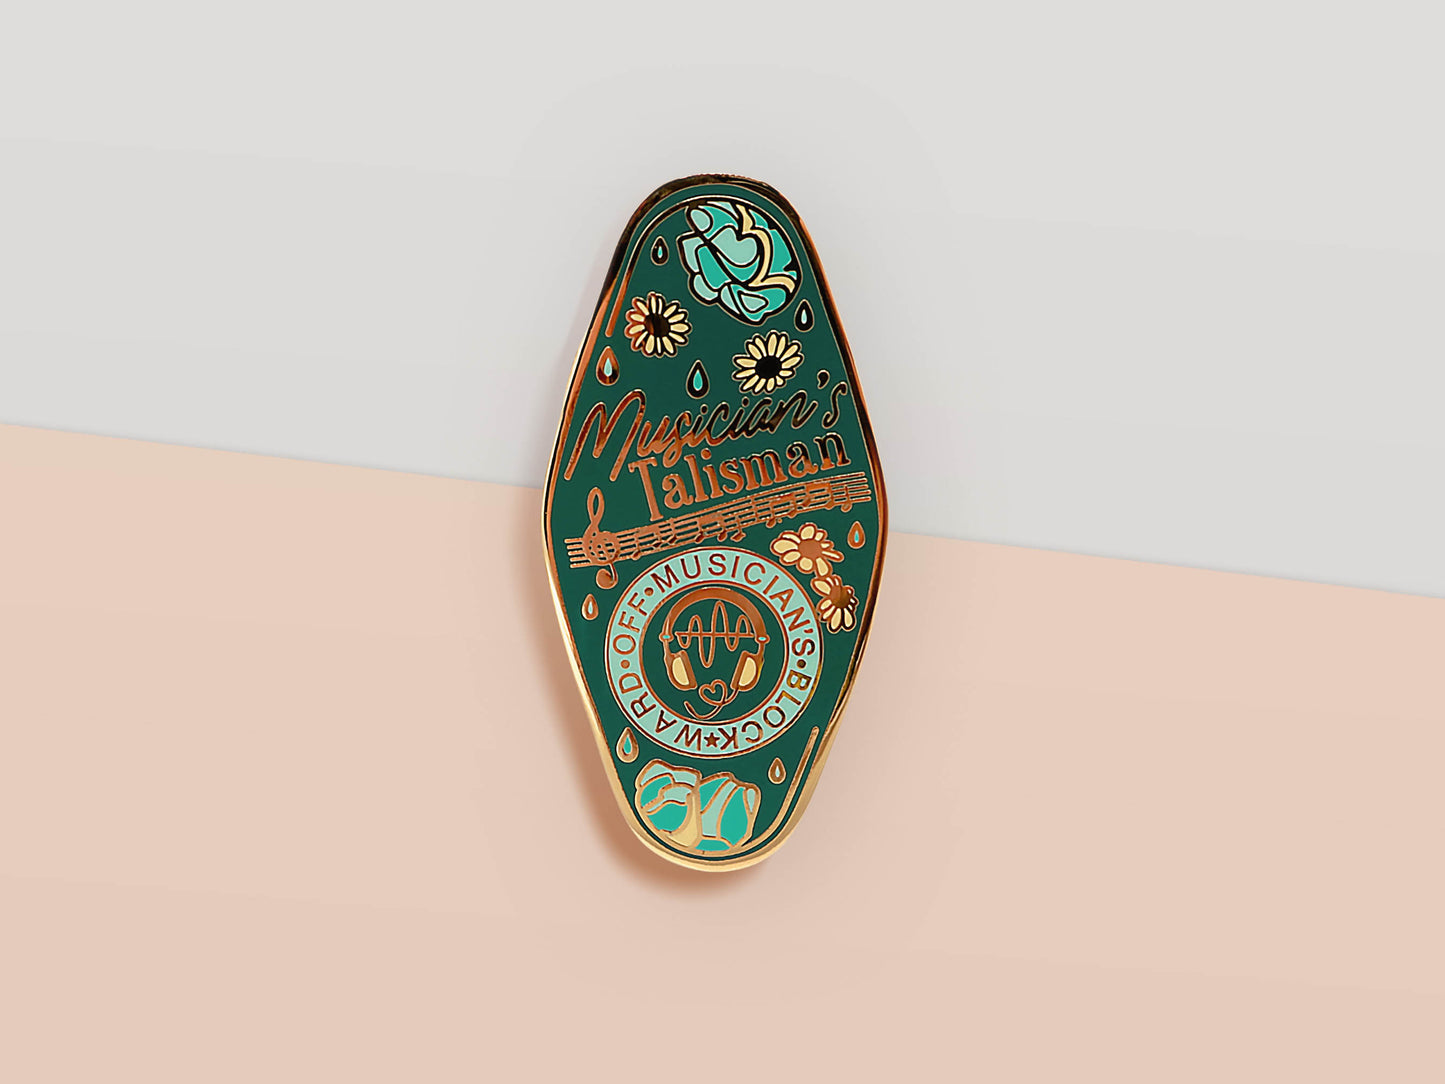 Gold Enamel Talisman Pin with blue design and the words Musician's Talisman, Ward of Musician's block. The pins design includes headphones and sheet music, raindrops, as well as flowers and crystals.